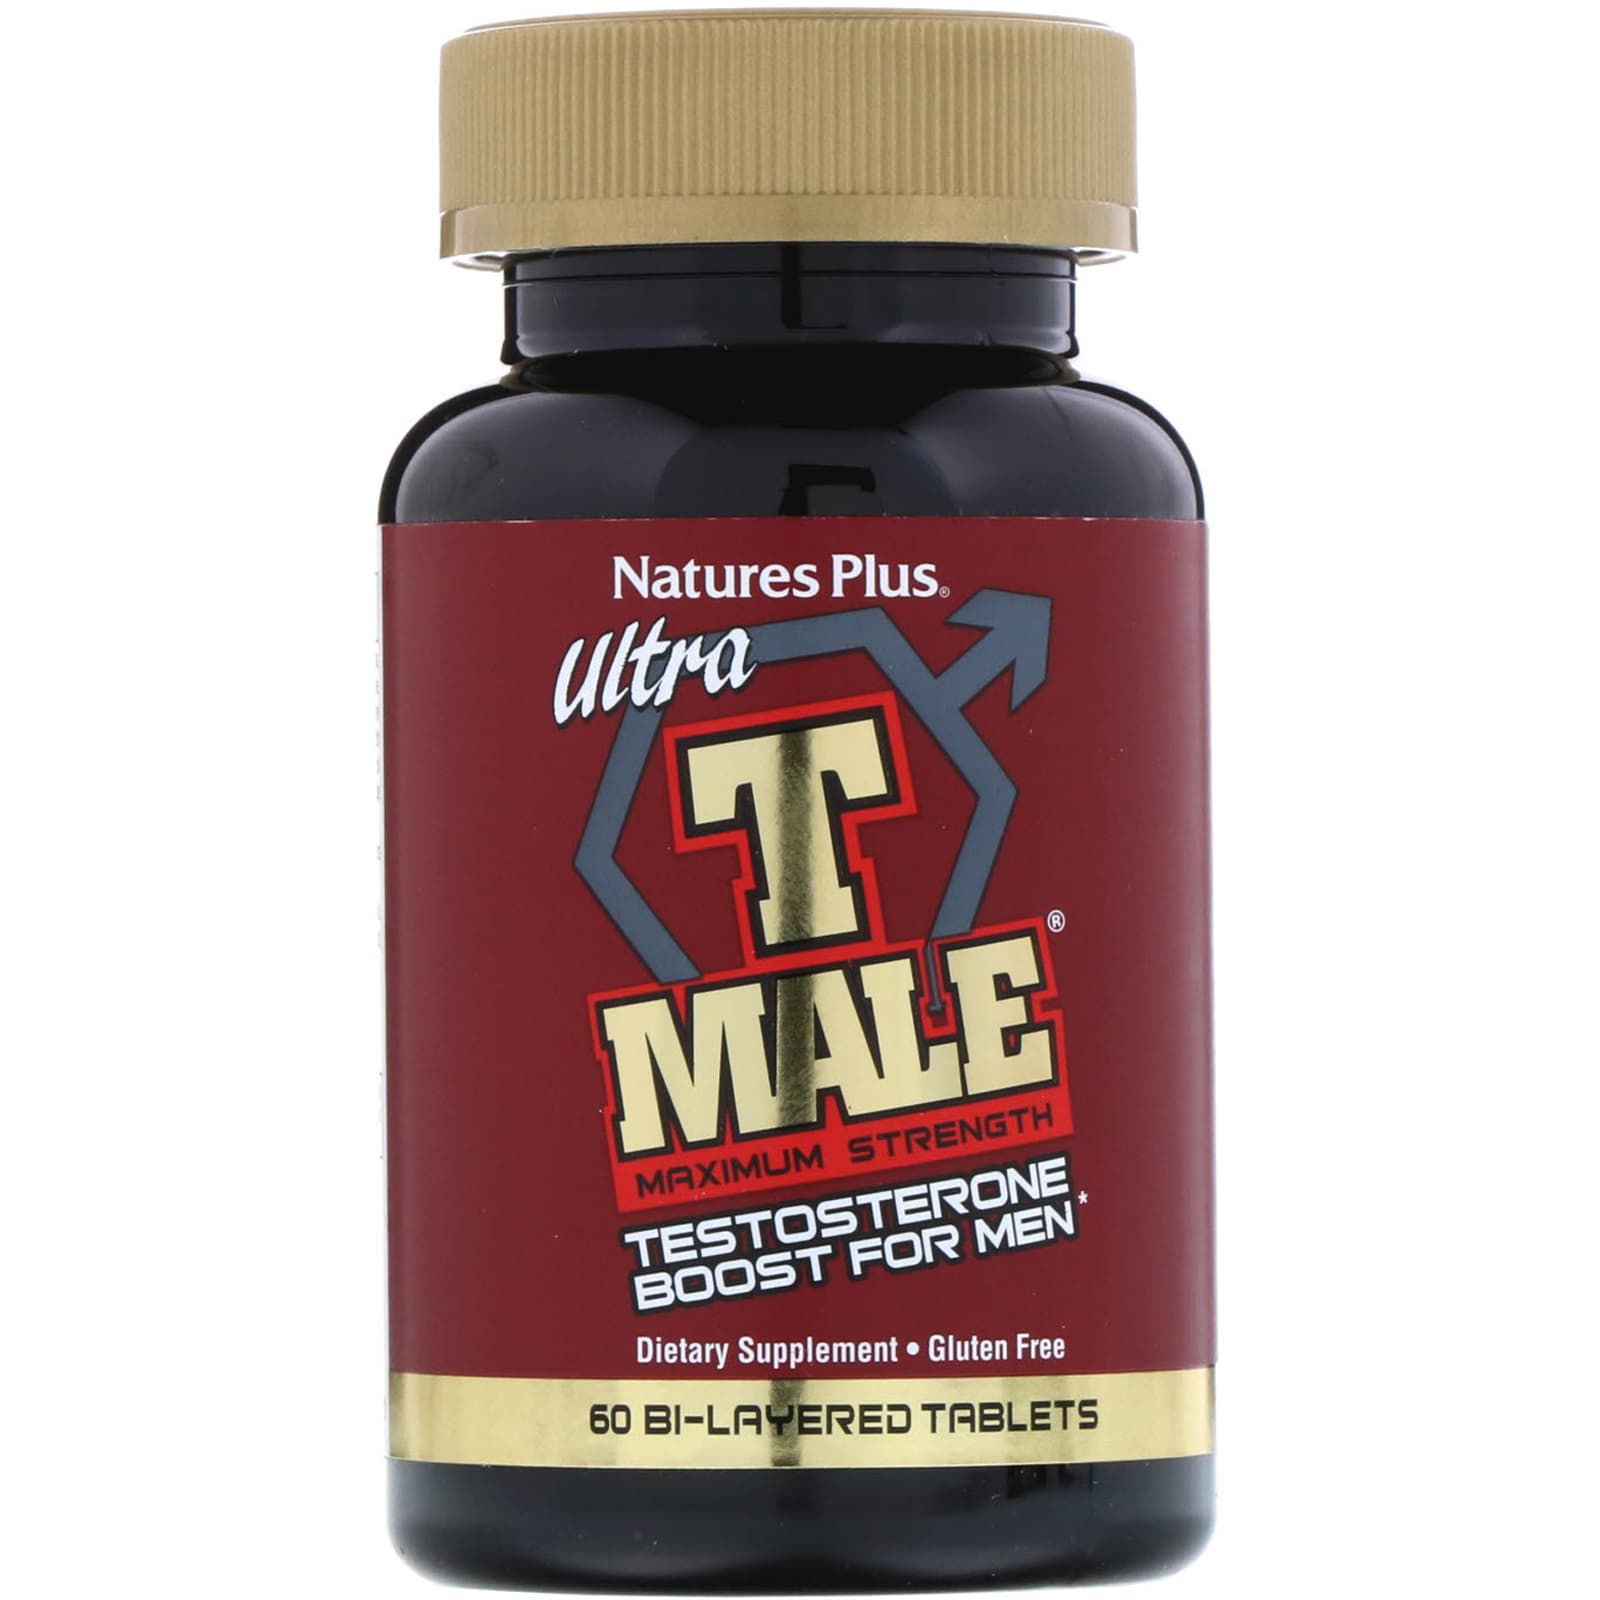 Nature Plus Ultra T Male Testosterone Boost Reviews